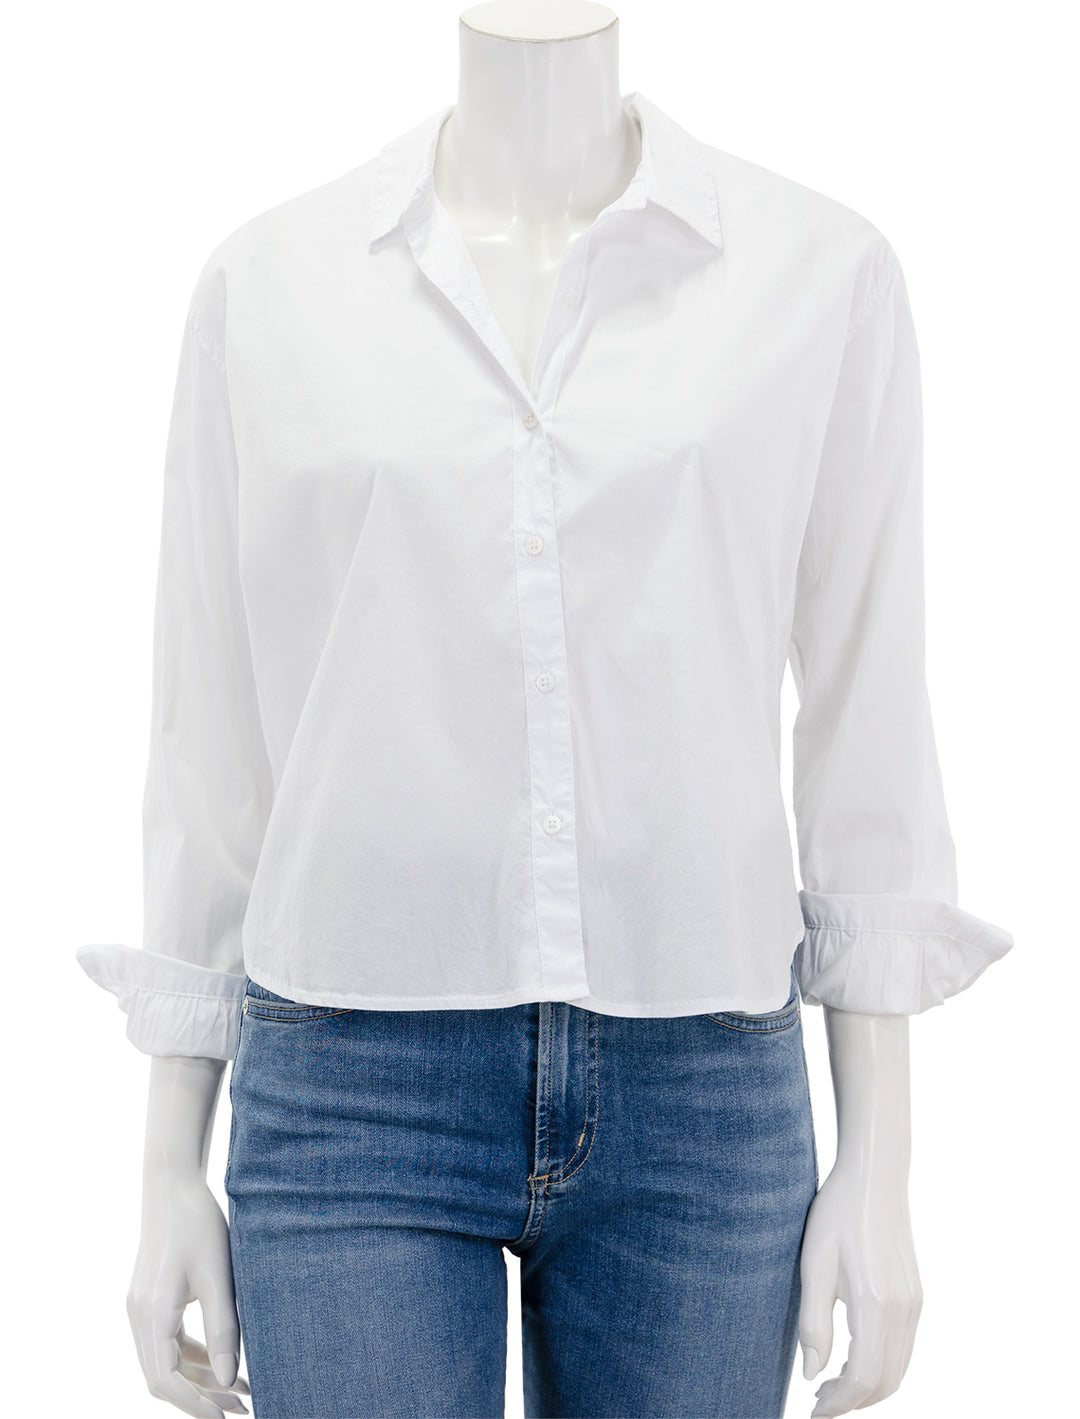 Front view of Splendid's cropped poplin button down in white.